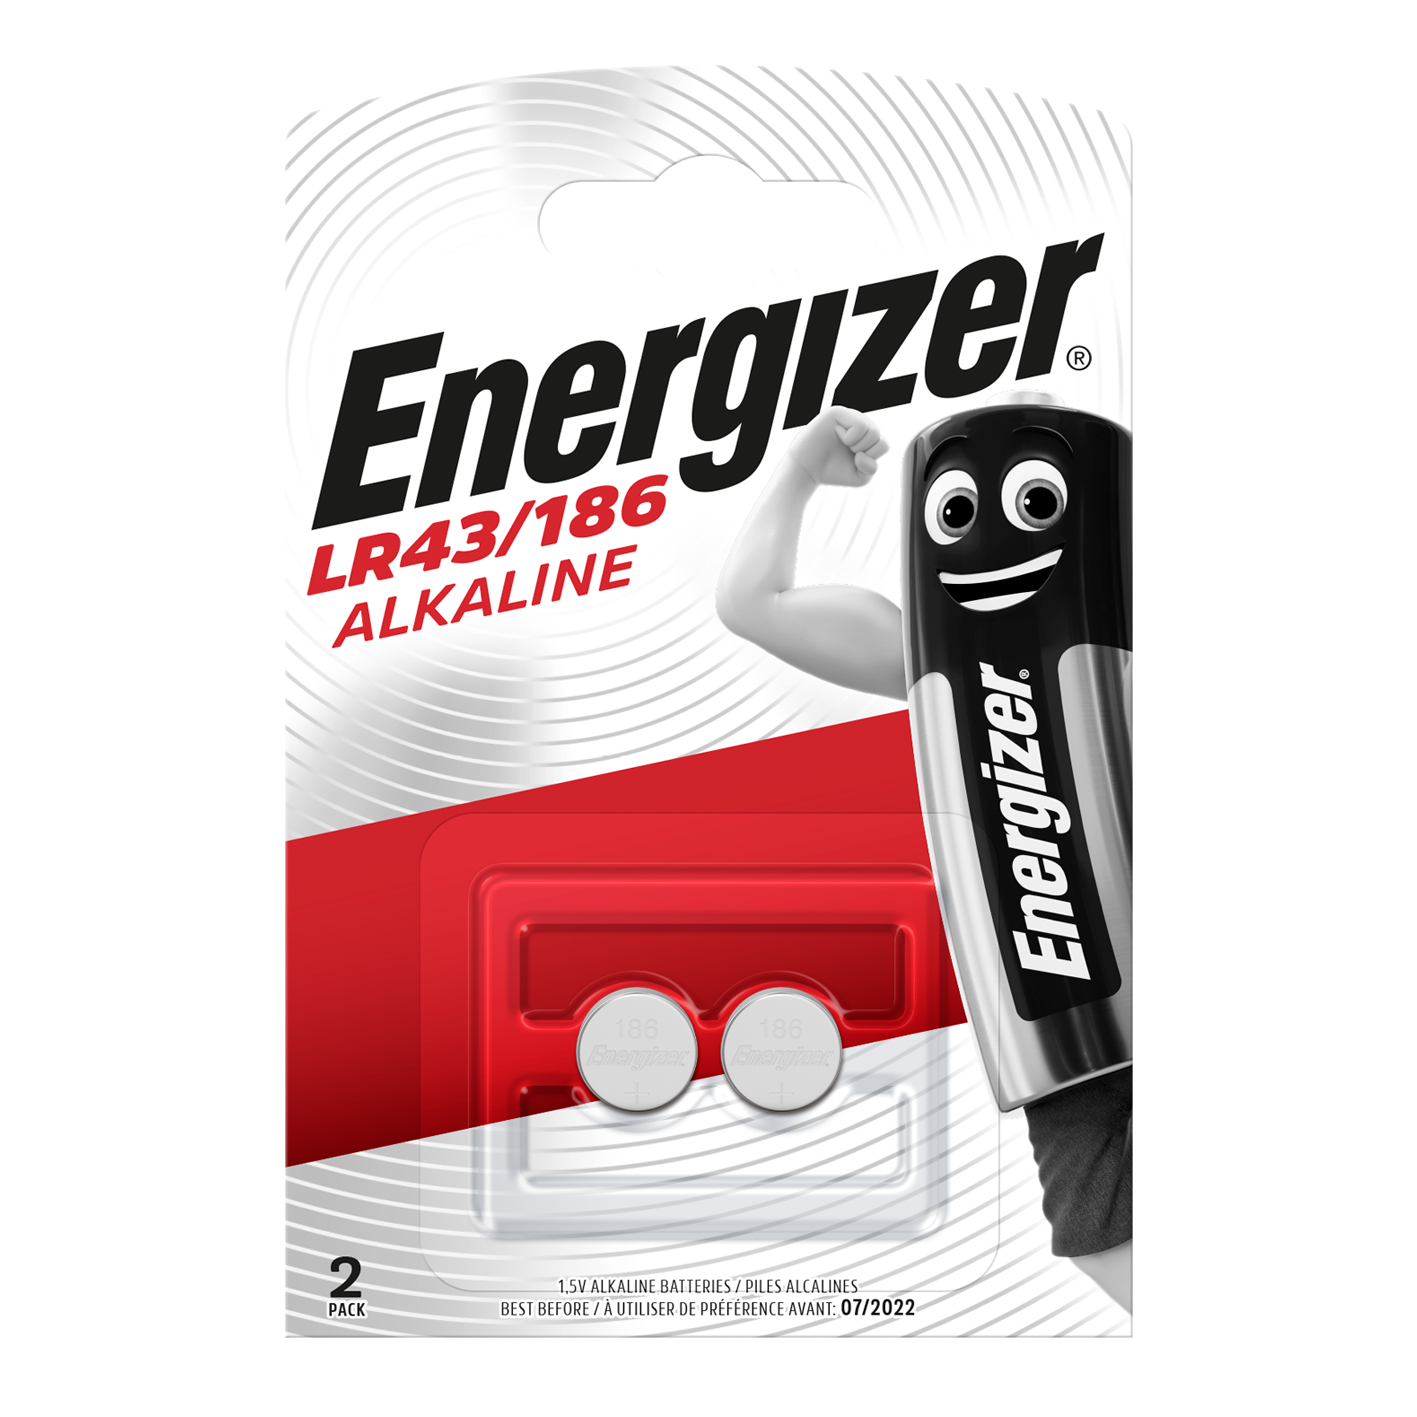 Energizer LR43/186 Alkaline Coin Cell, Pack of 2